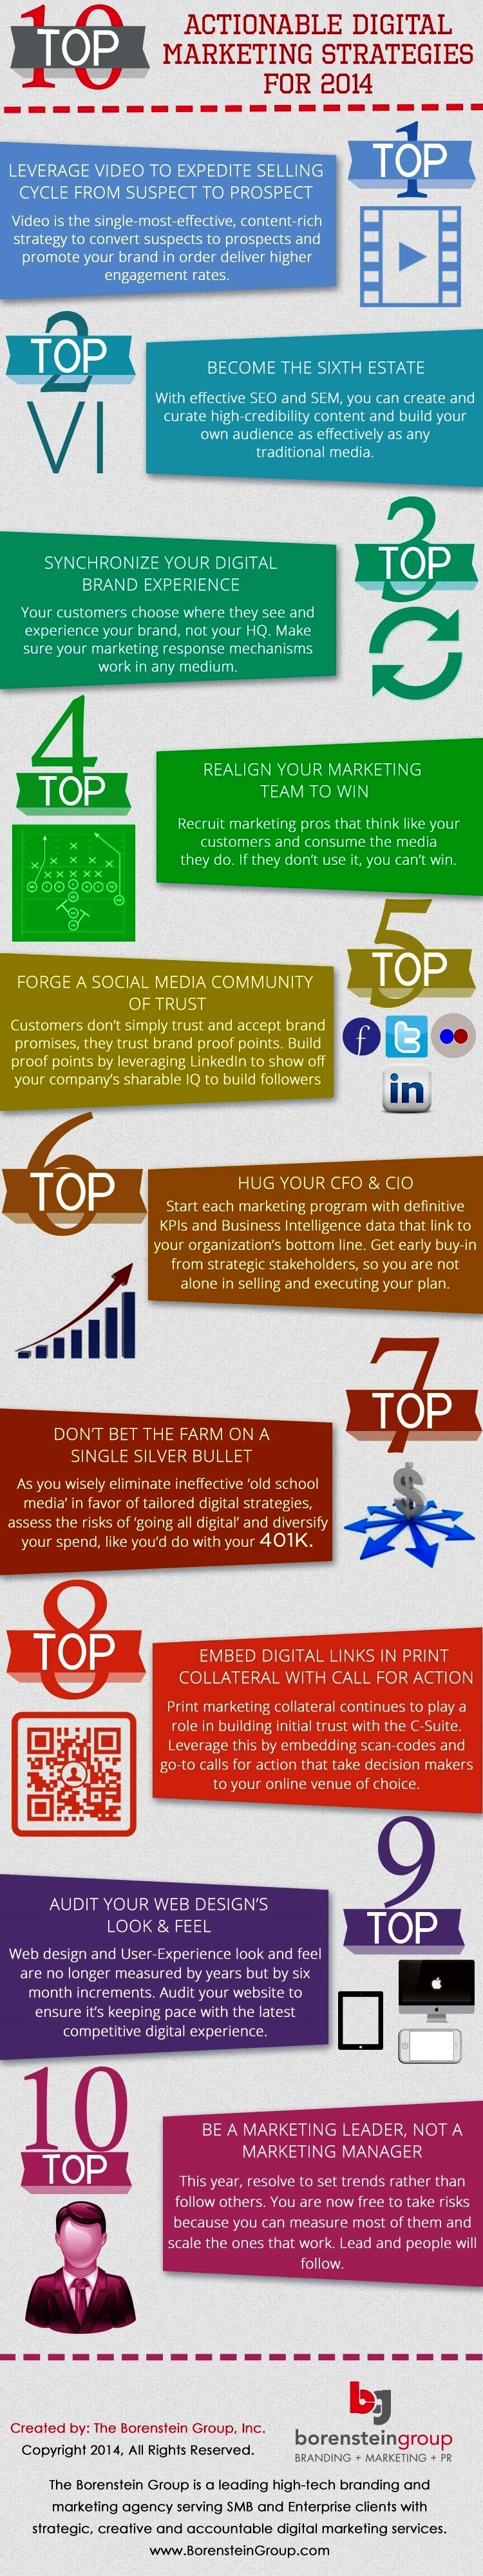 The-Borenstein-Group-Top-10-Actionable-Marketing-Strategies-for-2014